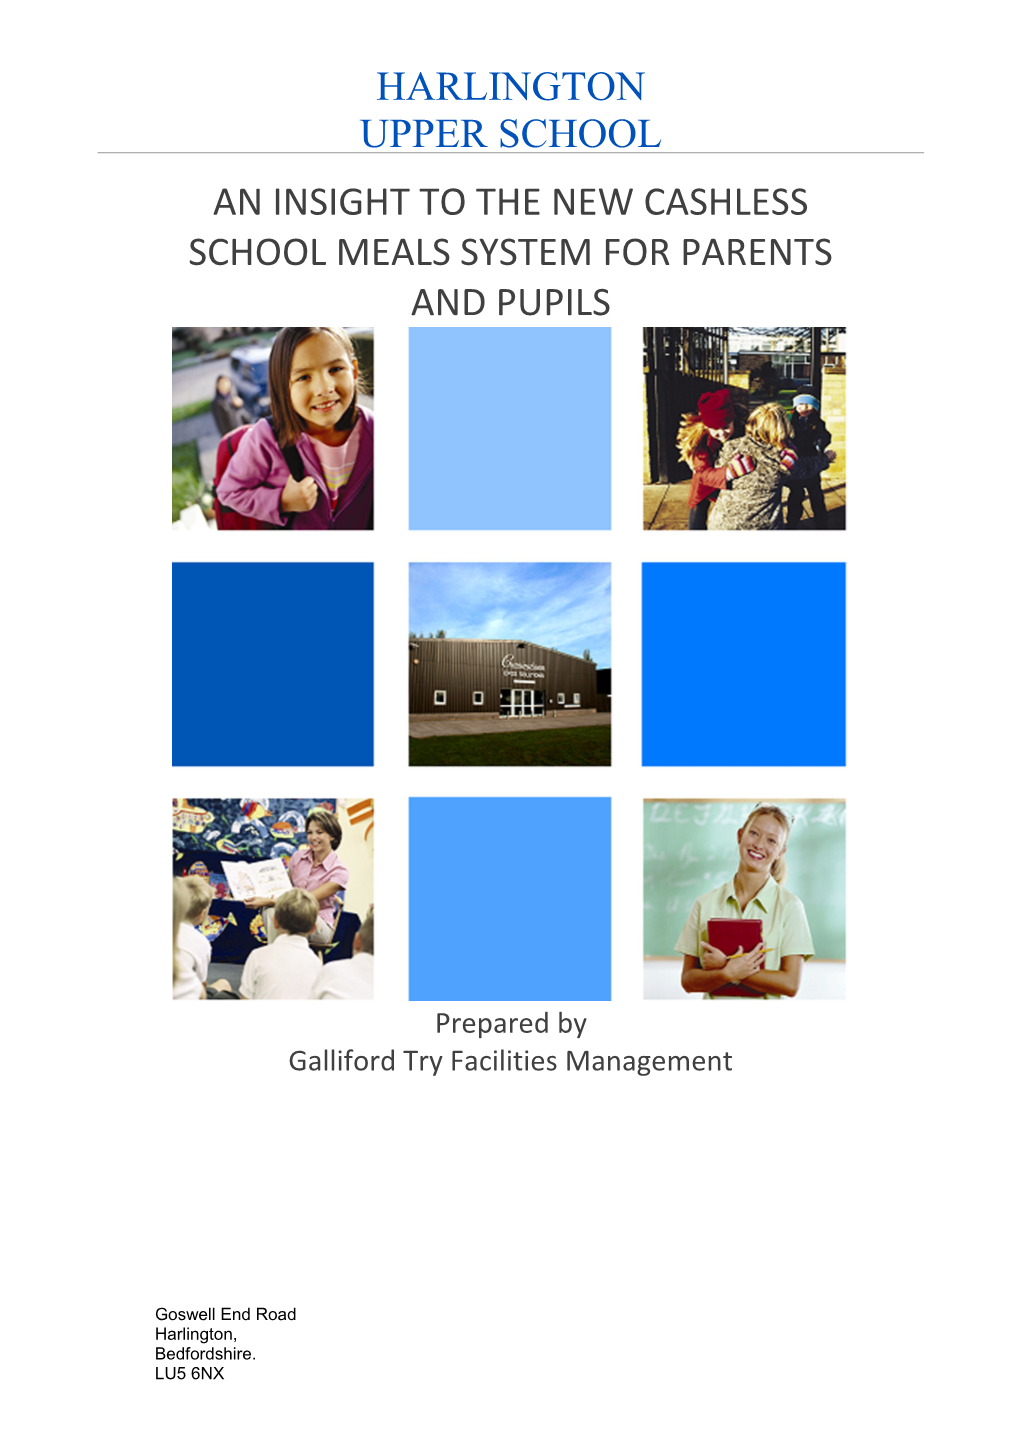 An Insight to the New Cashless School Meals System for Parents and Pupils